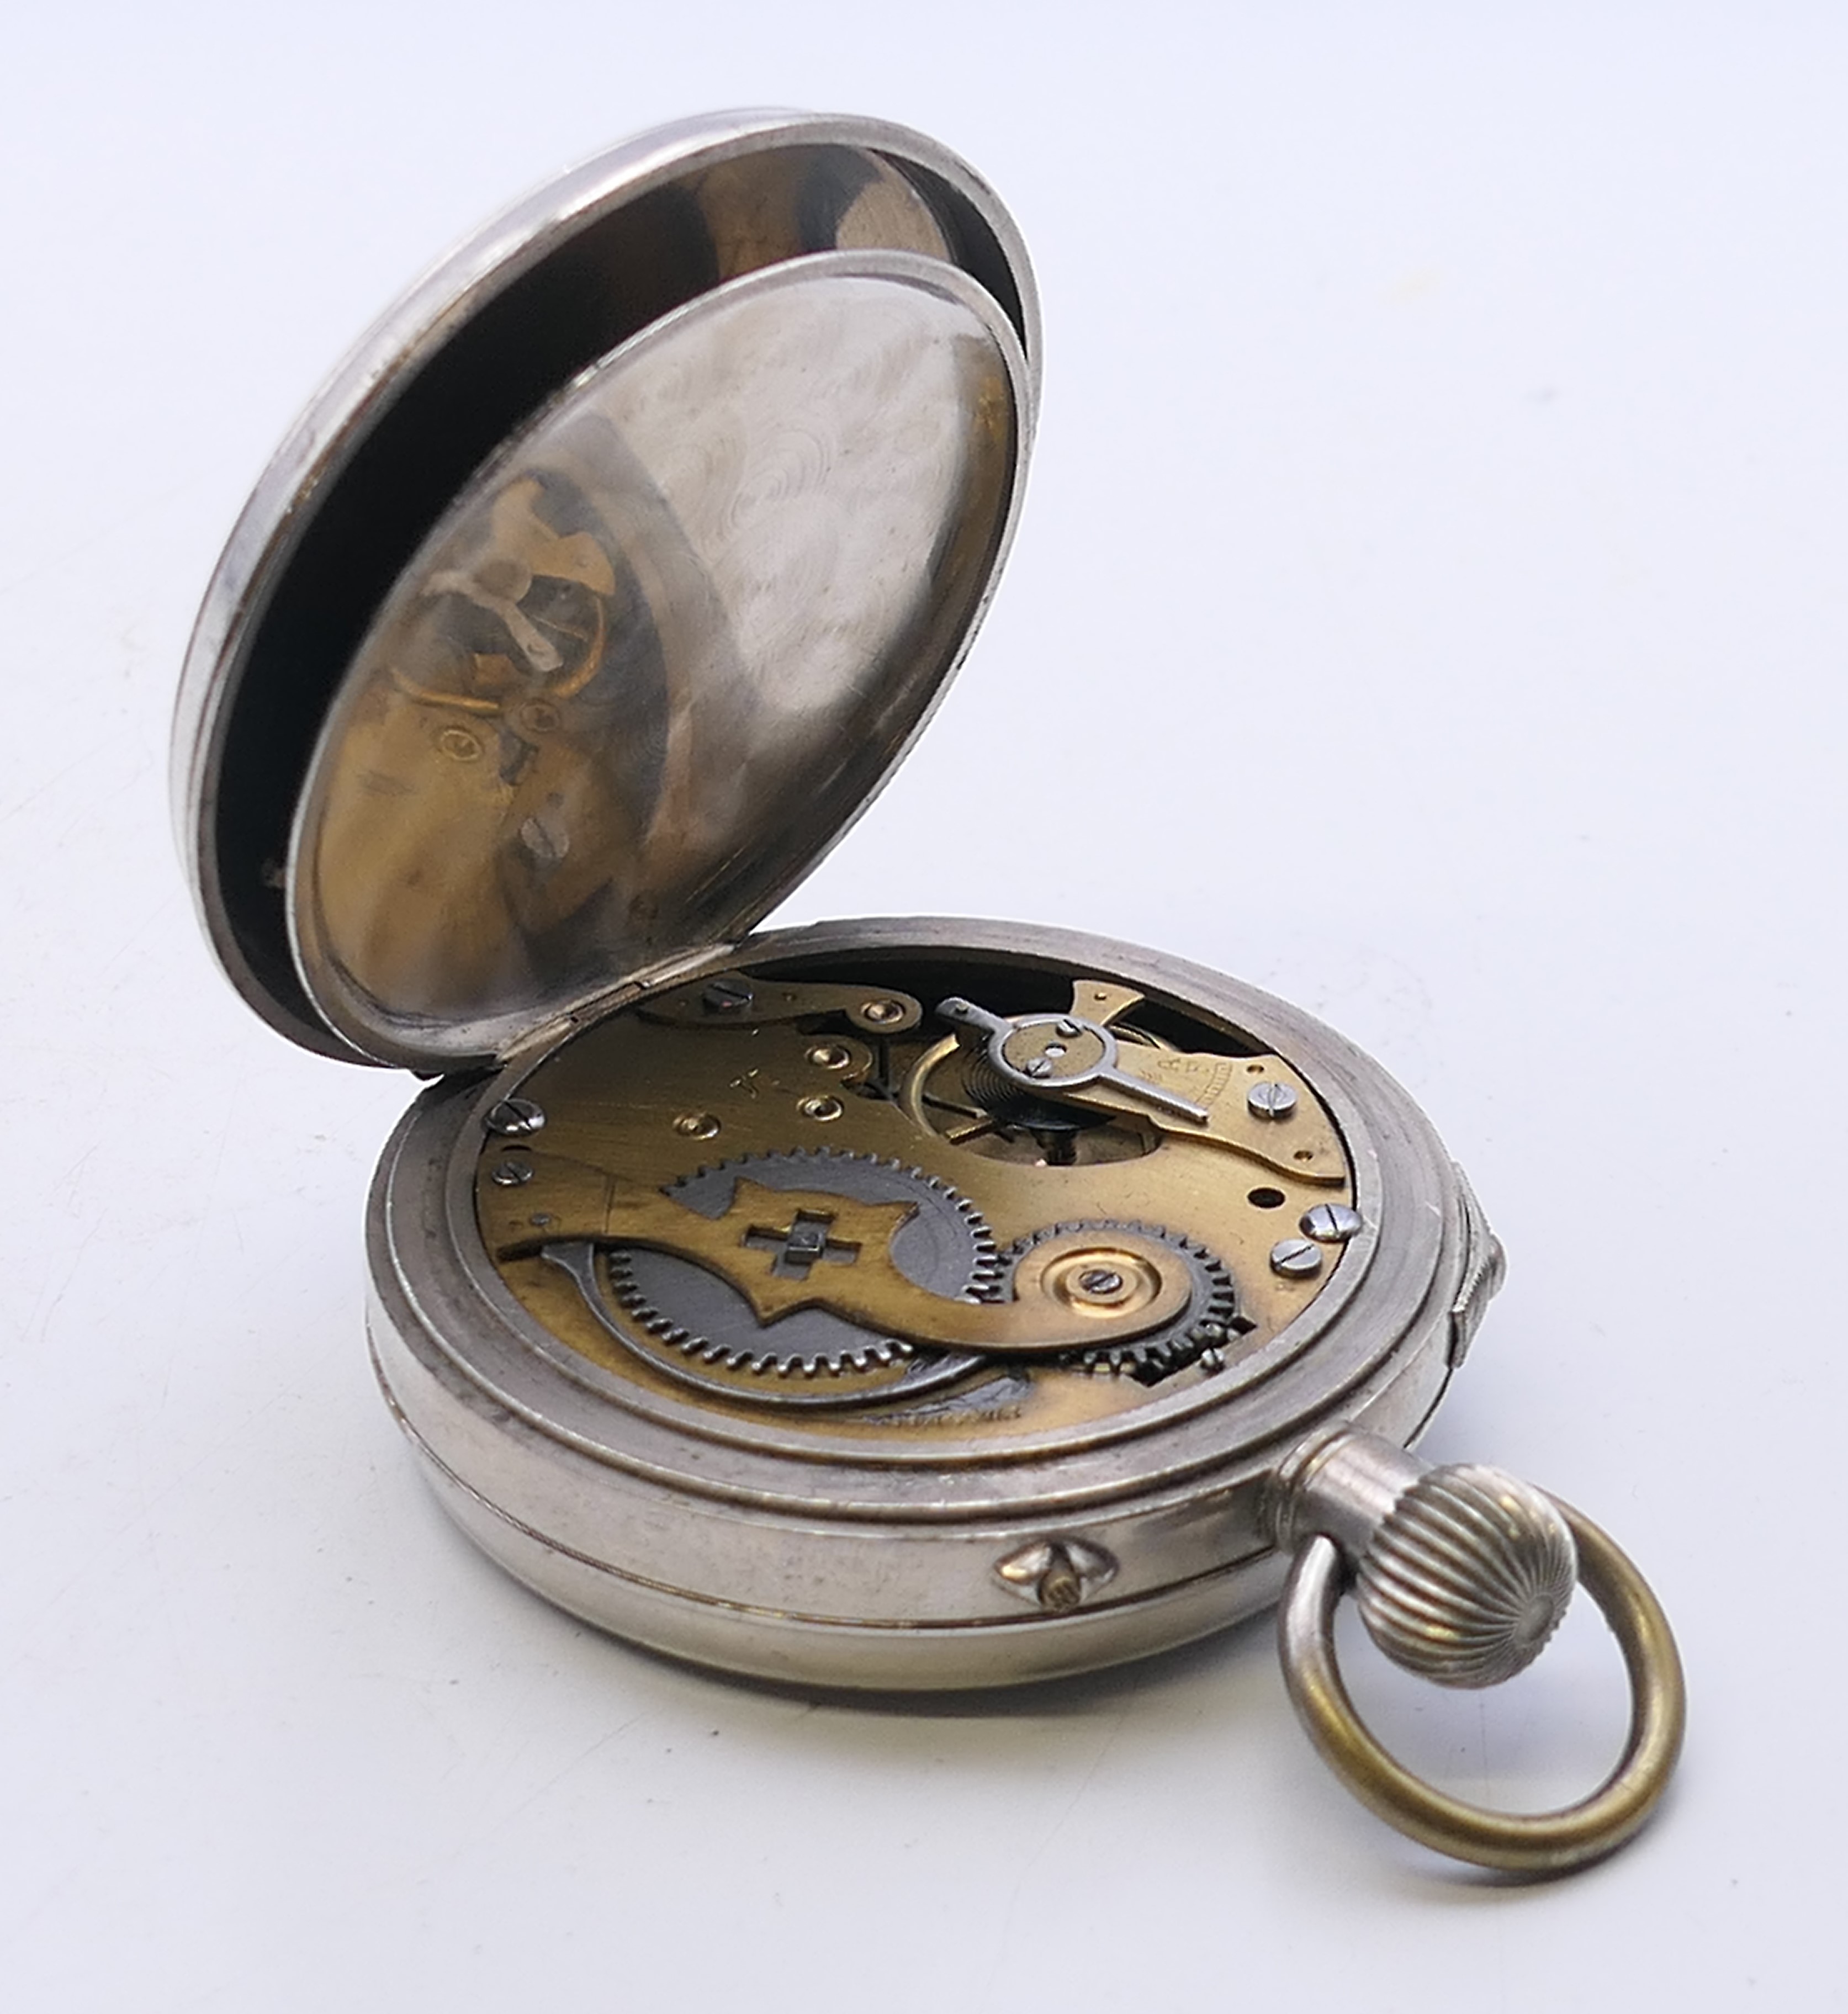 Two Art Deco gentleman's pocket watches, one marked Luxor, the other marked Premia Alfred Wolf Ltd, - Image 14 of 23